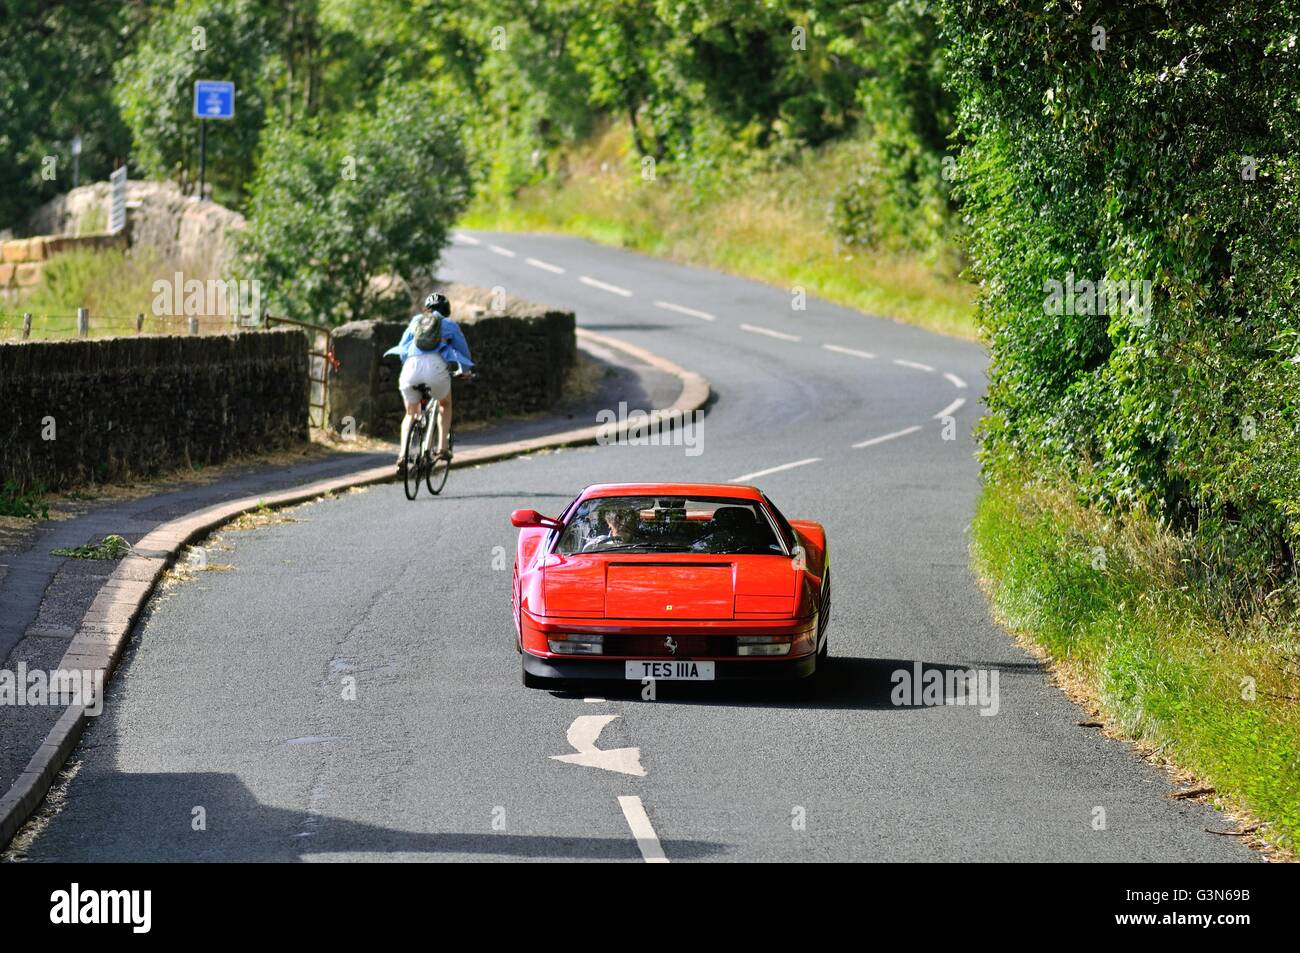 Ferrari Testarossa driving along a country road on a summer's day, passing a cycling going in the opposite direction Stock Photo